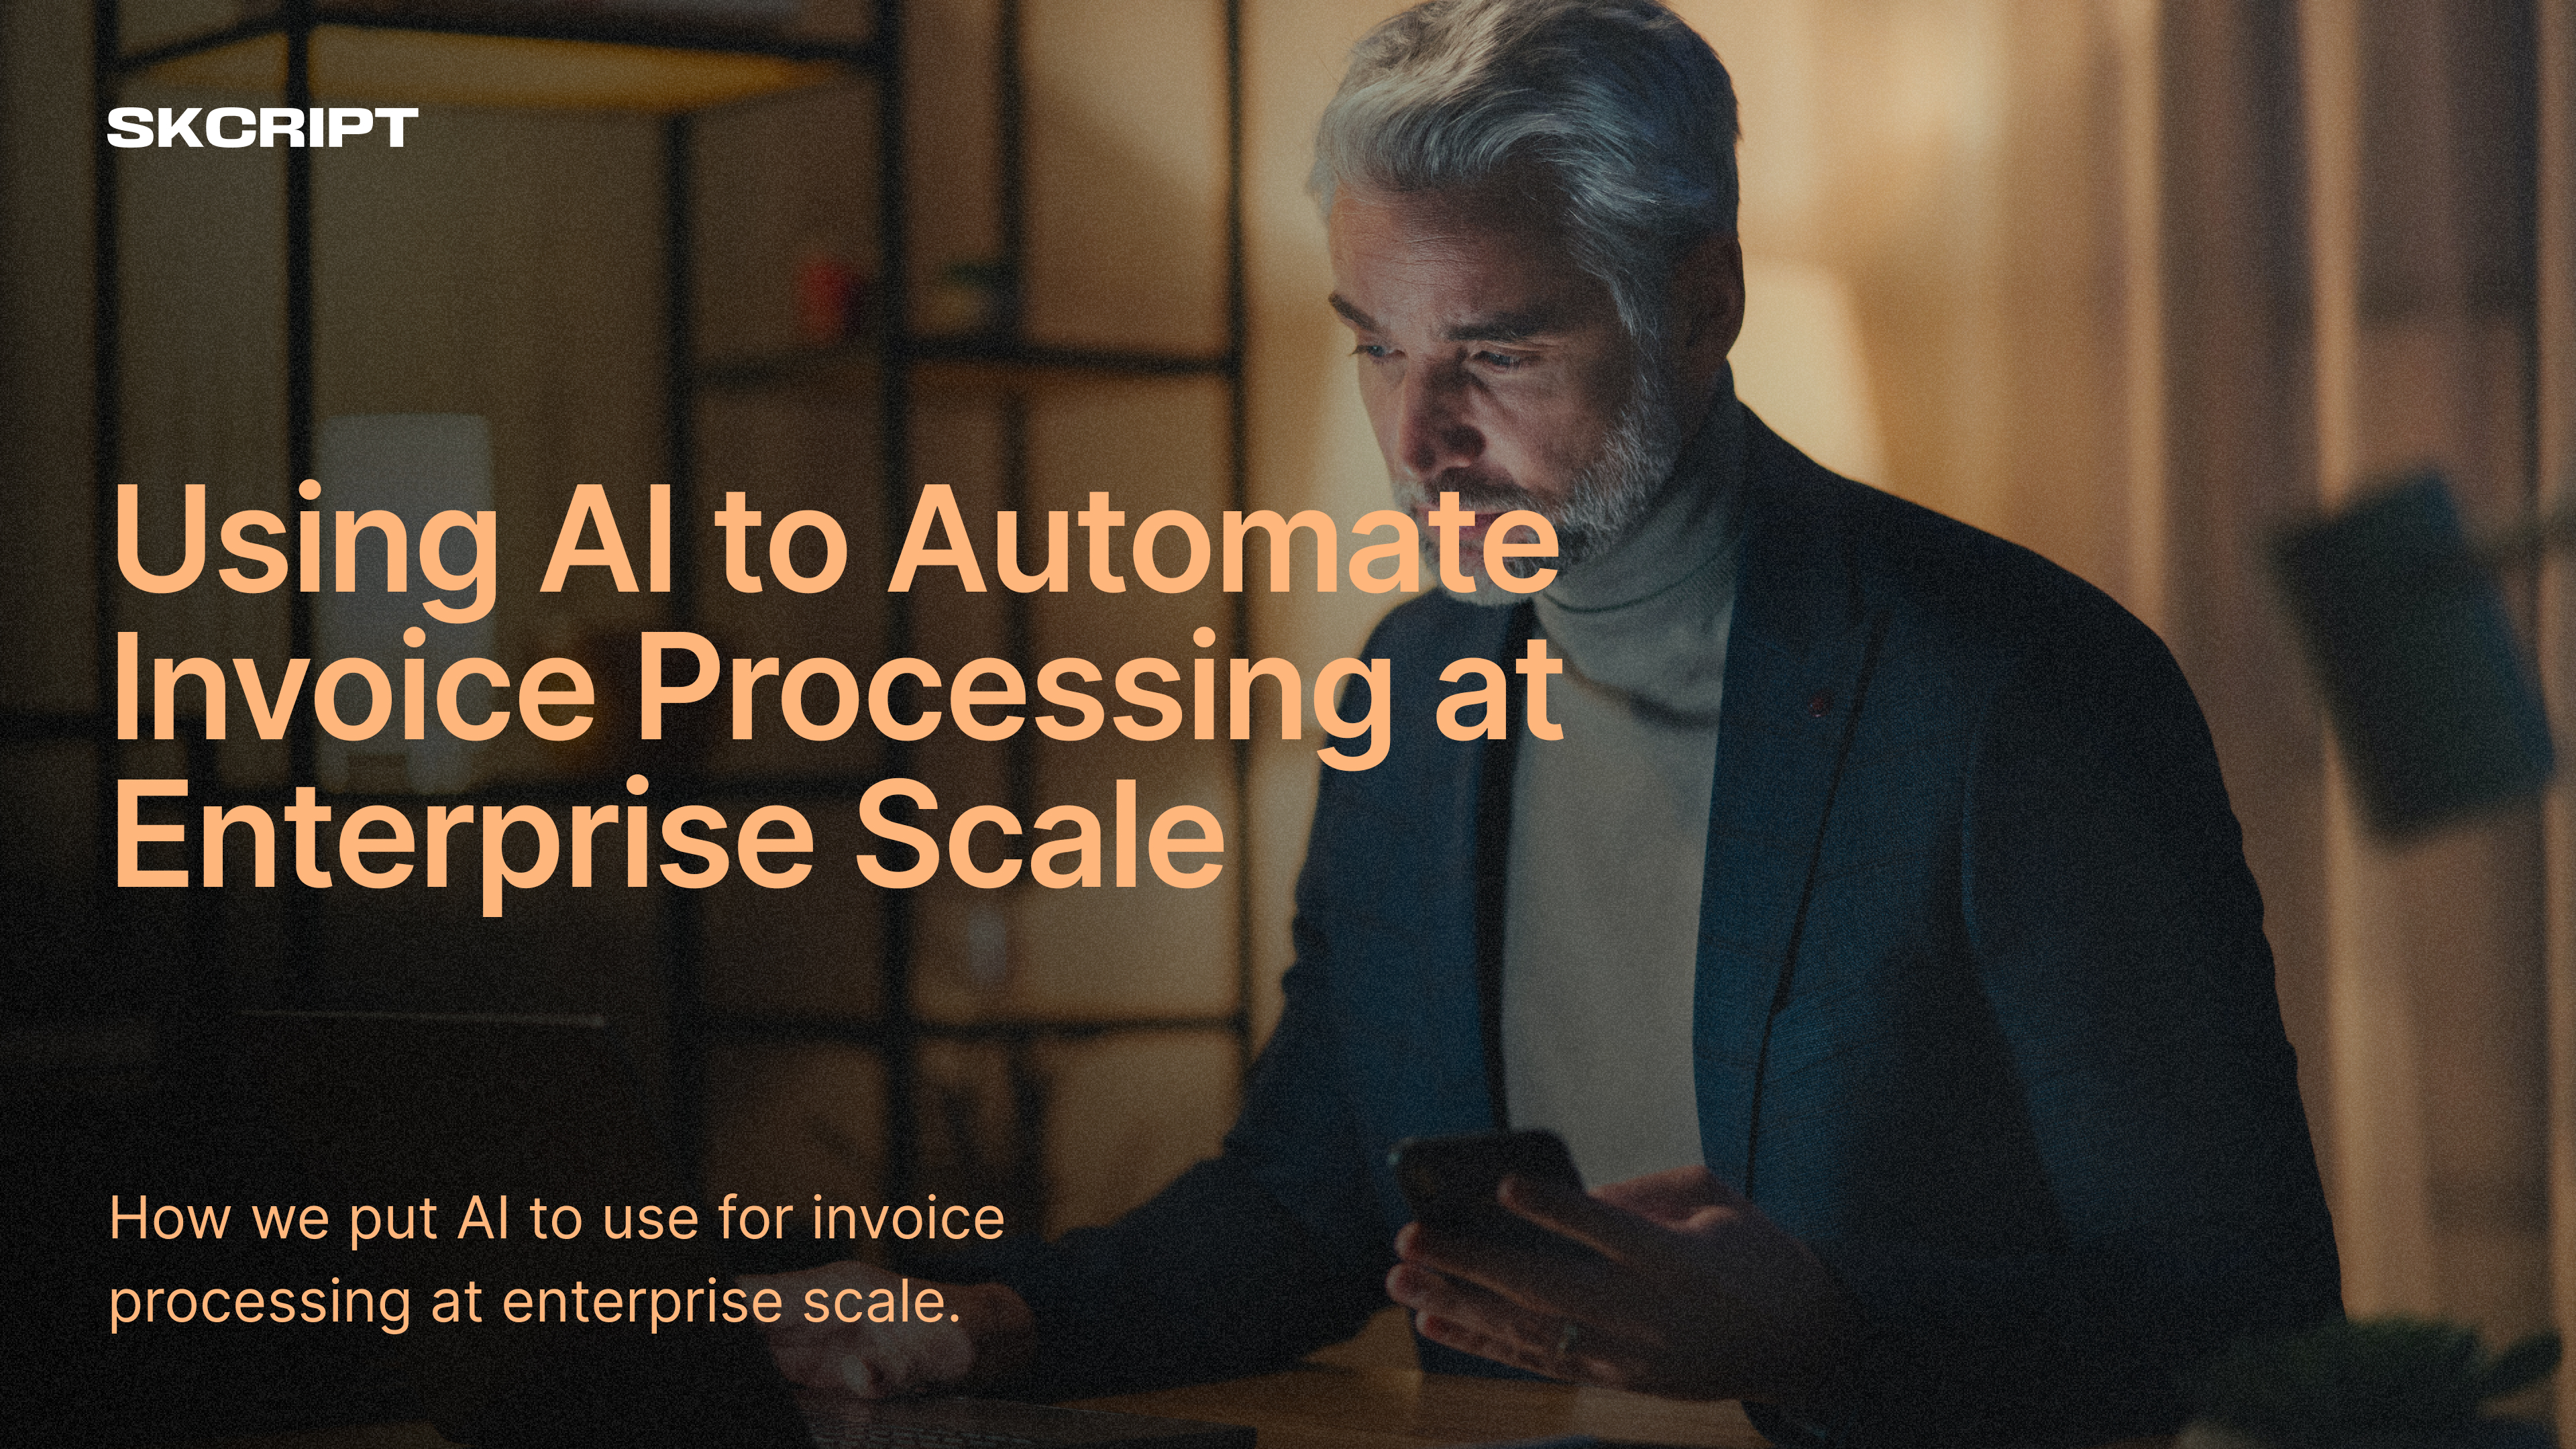 Using AI to Automate Invoice Processing at Enterprise Scale